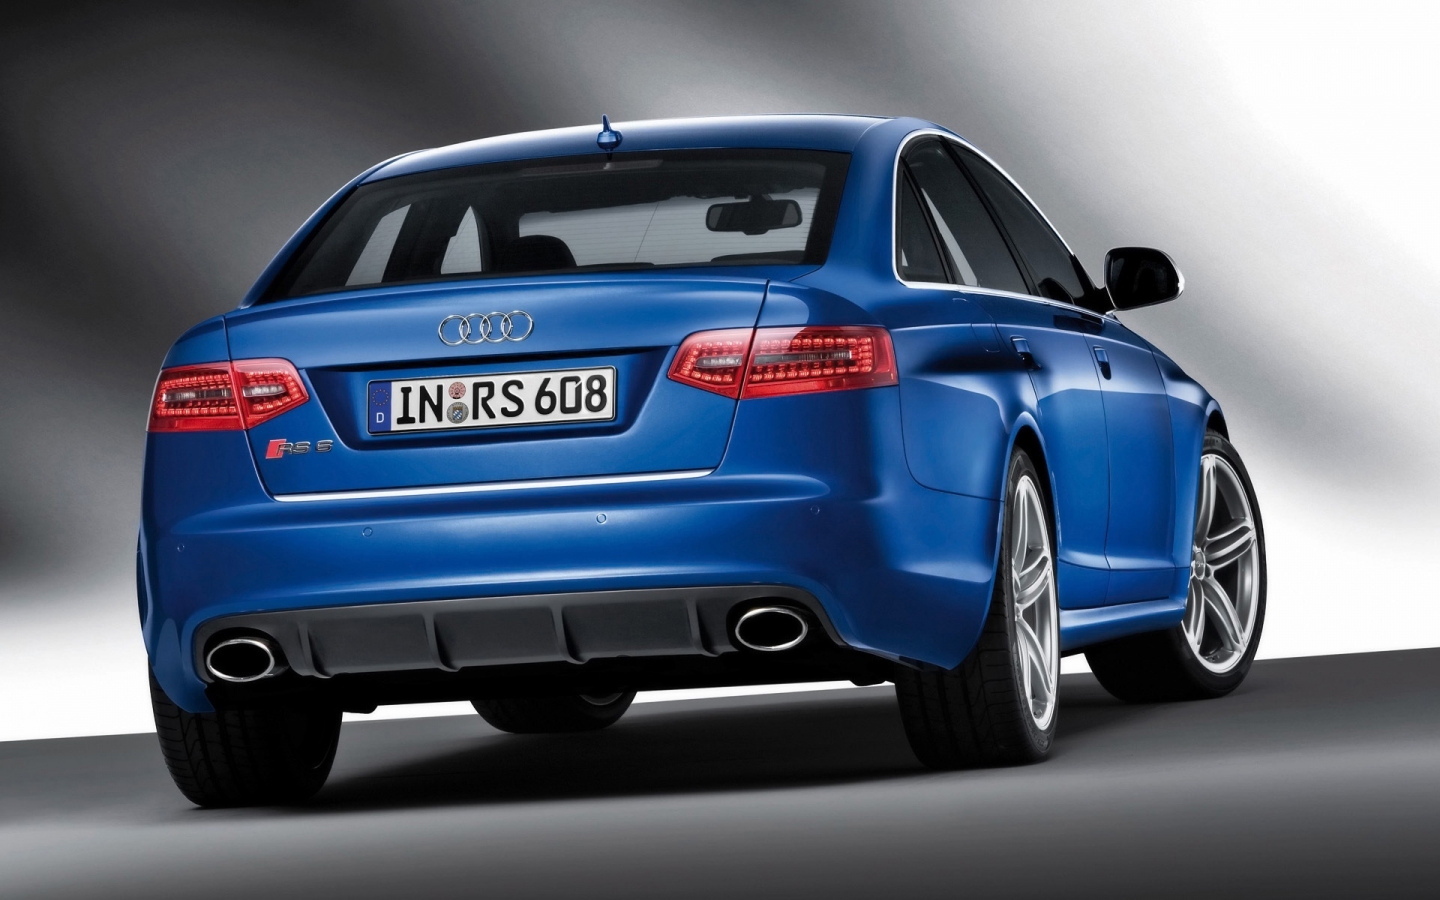 2009 Audi RS 6 - Rear Angle Tilt for 1440 x 900 widescreen resolution